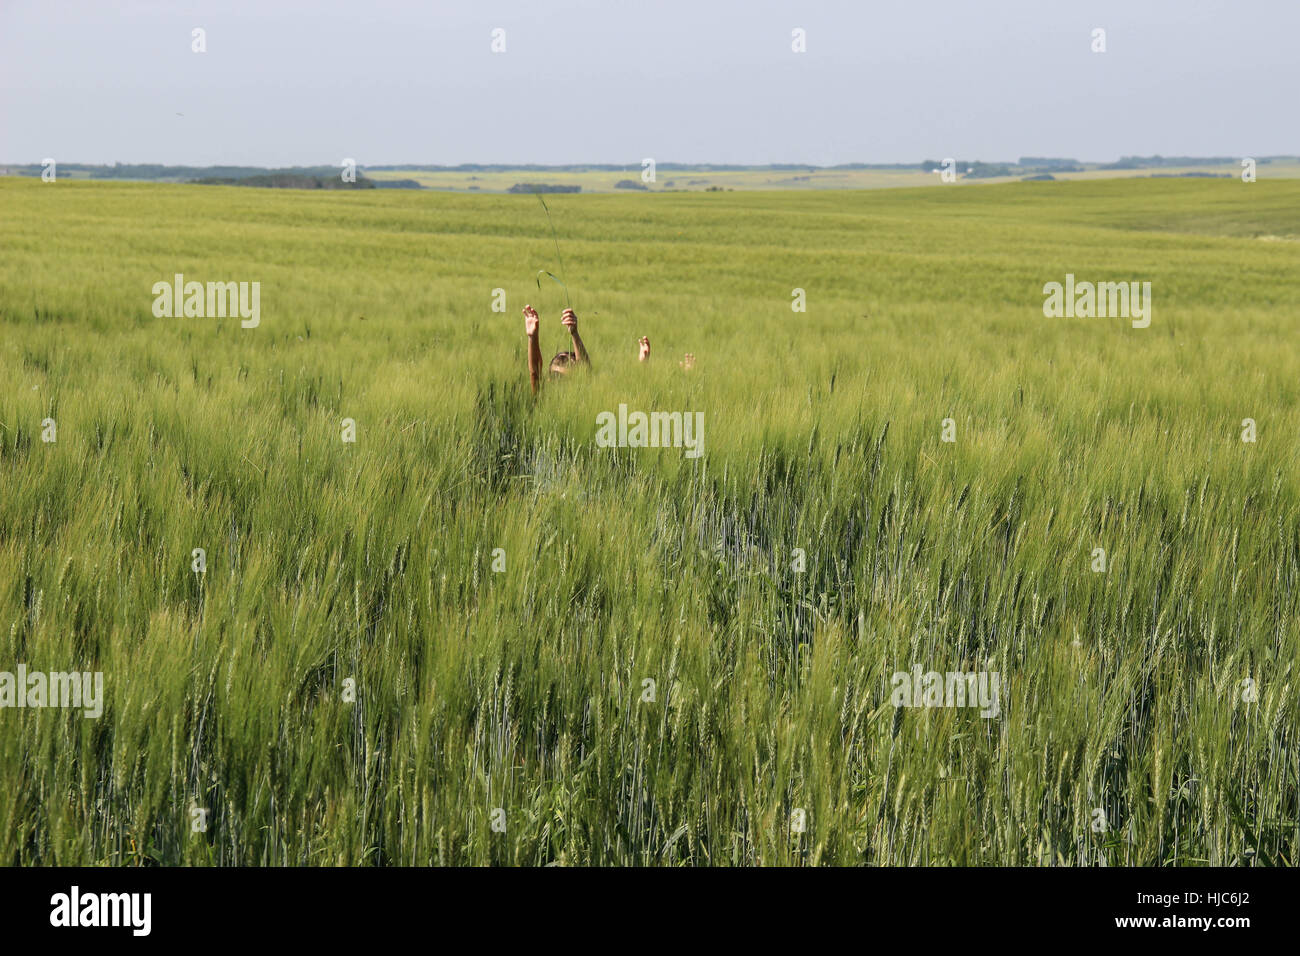 My children enjoying getting lost in a wheat field in Canada. Stock Photo